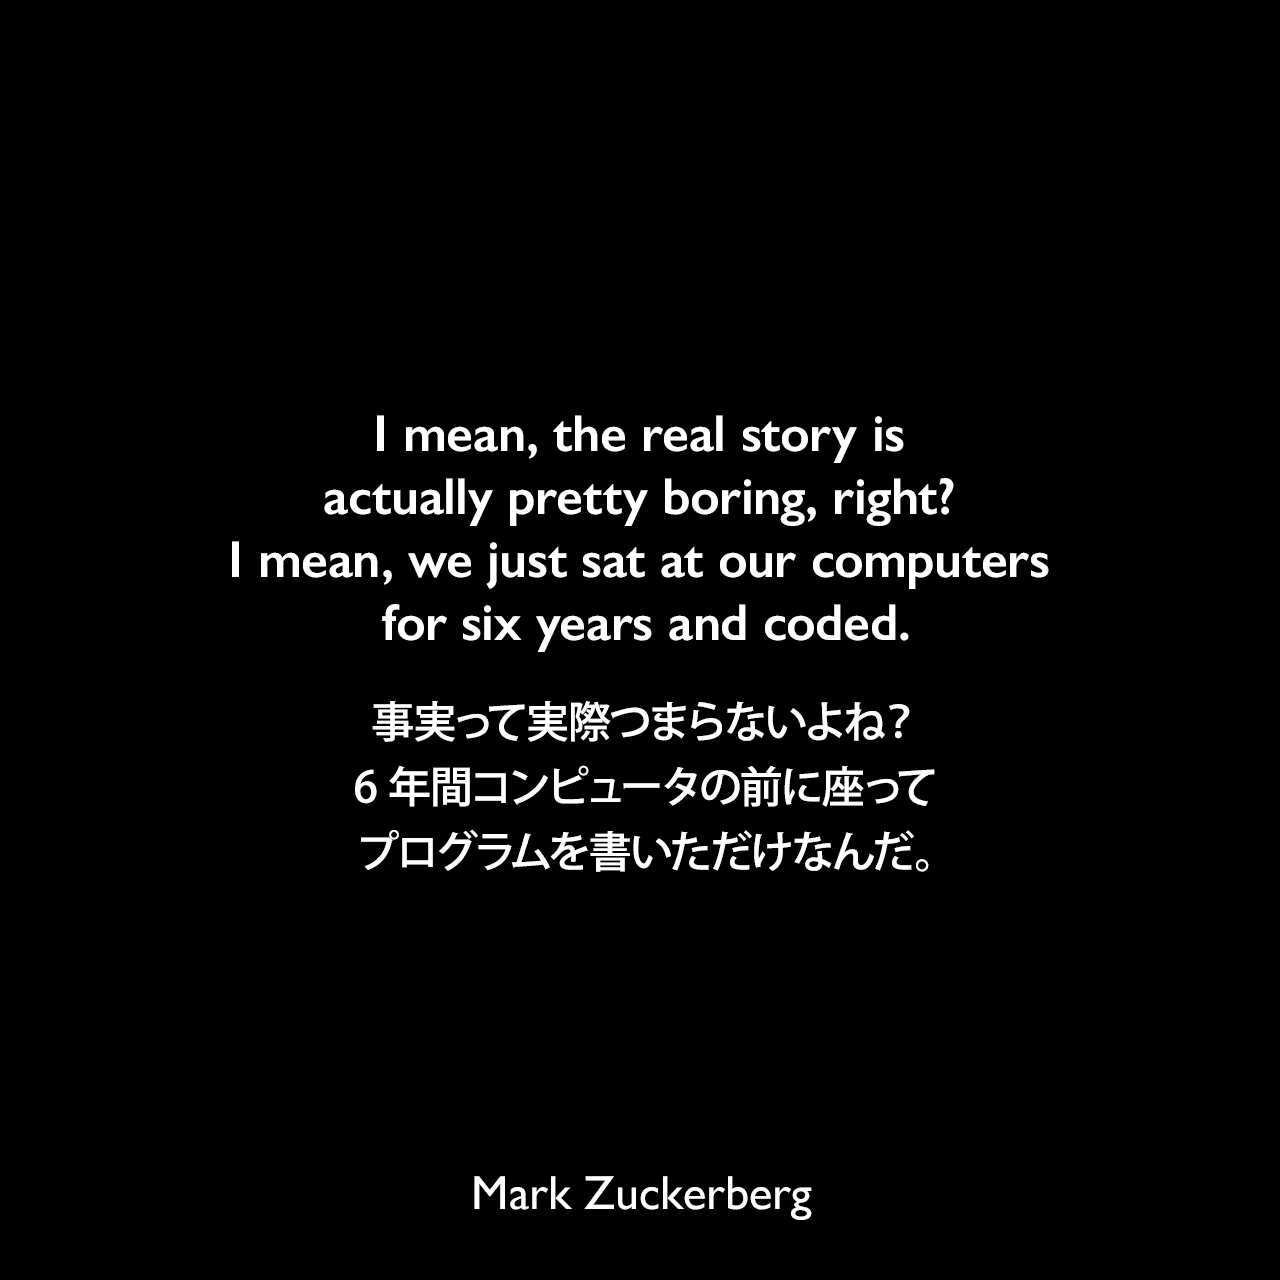 I mean, the real story is actually pretty boring, right? I mean, we just sat at our computers for six years and coded.事実って実際つまらないよね？6年間コンピュータの前に座ってプログラムを書いただけなんだ。Mark Zuckerberg